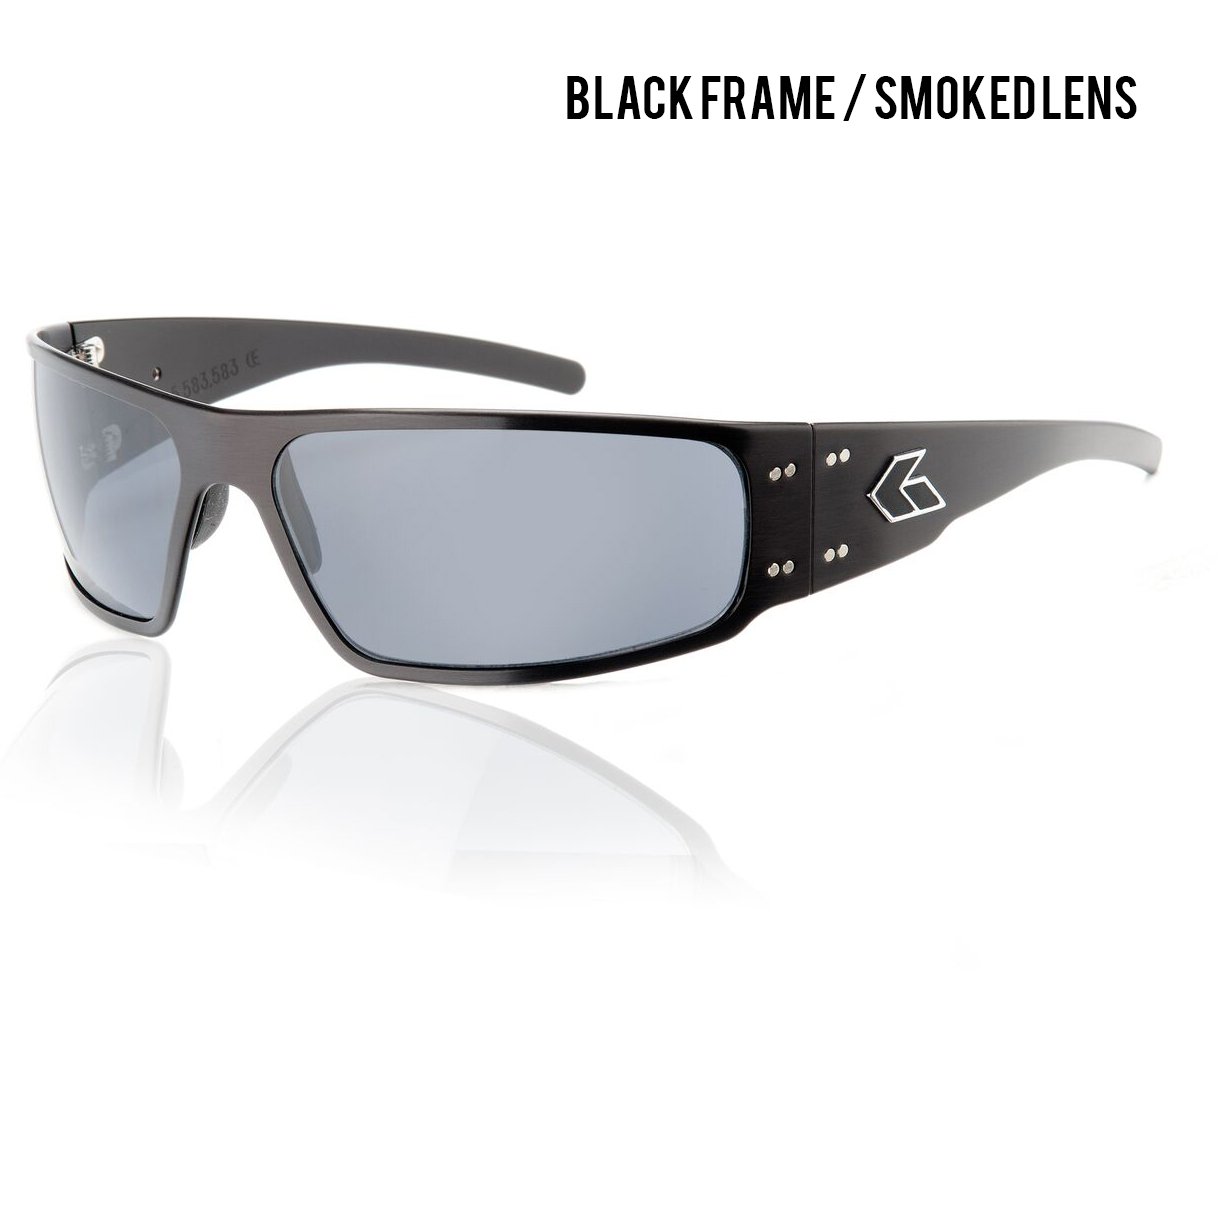 New Gatorz Blackout Magnum sunglasses with SMOKED OPZ Lens 